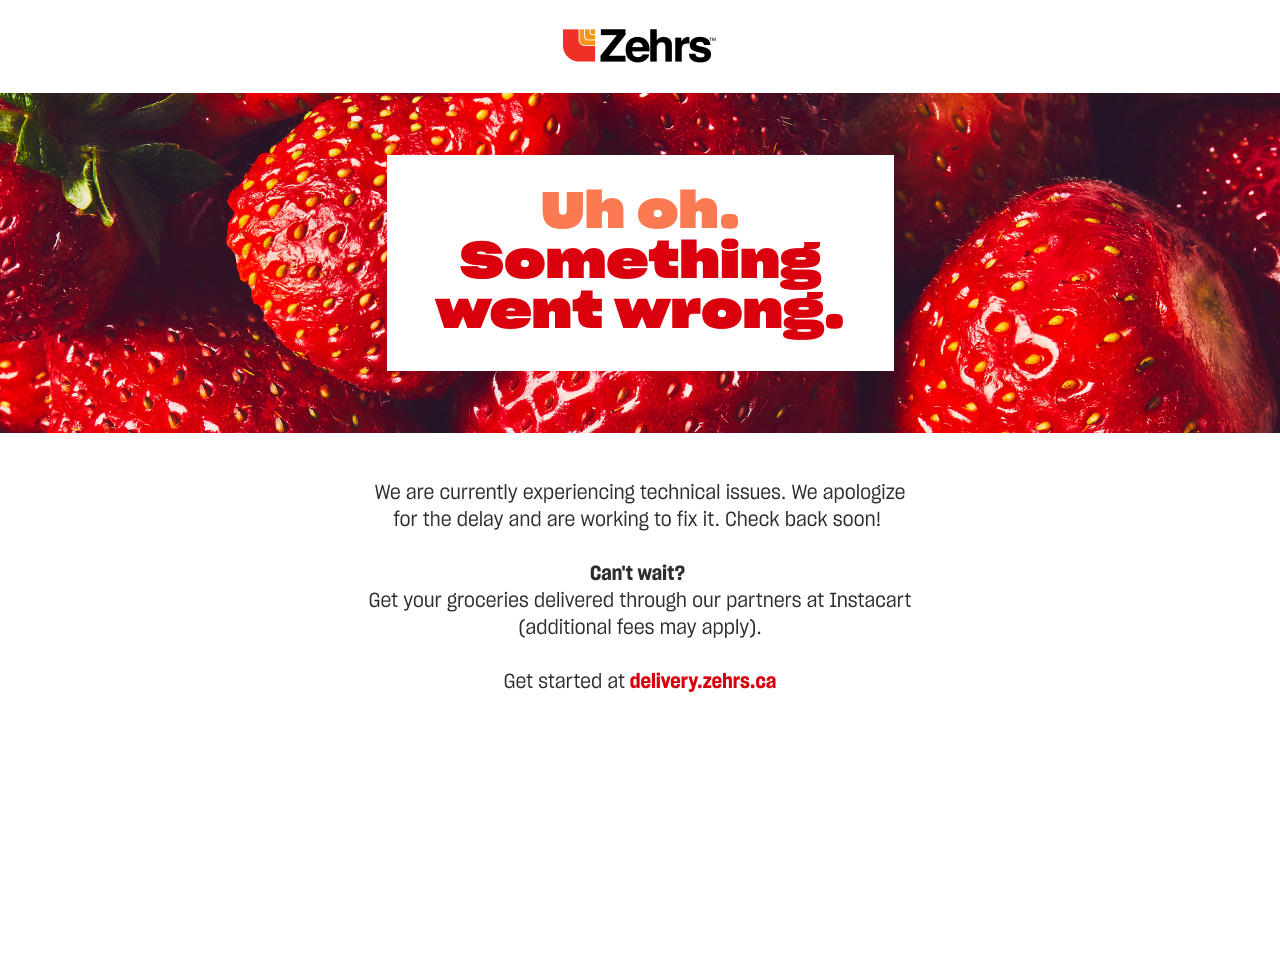 Uh oh. Something went wrong. We are currently experiencing technical issues due to an exceptional volume of traffic to our site. We apologize for the delay and are working to fix it. Looking for online grocery delivery? You can still order groceries online with our partners at Instacart. Get started at delivery.zehrs.ca . Please note that Instacart deliver fees may vary.